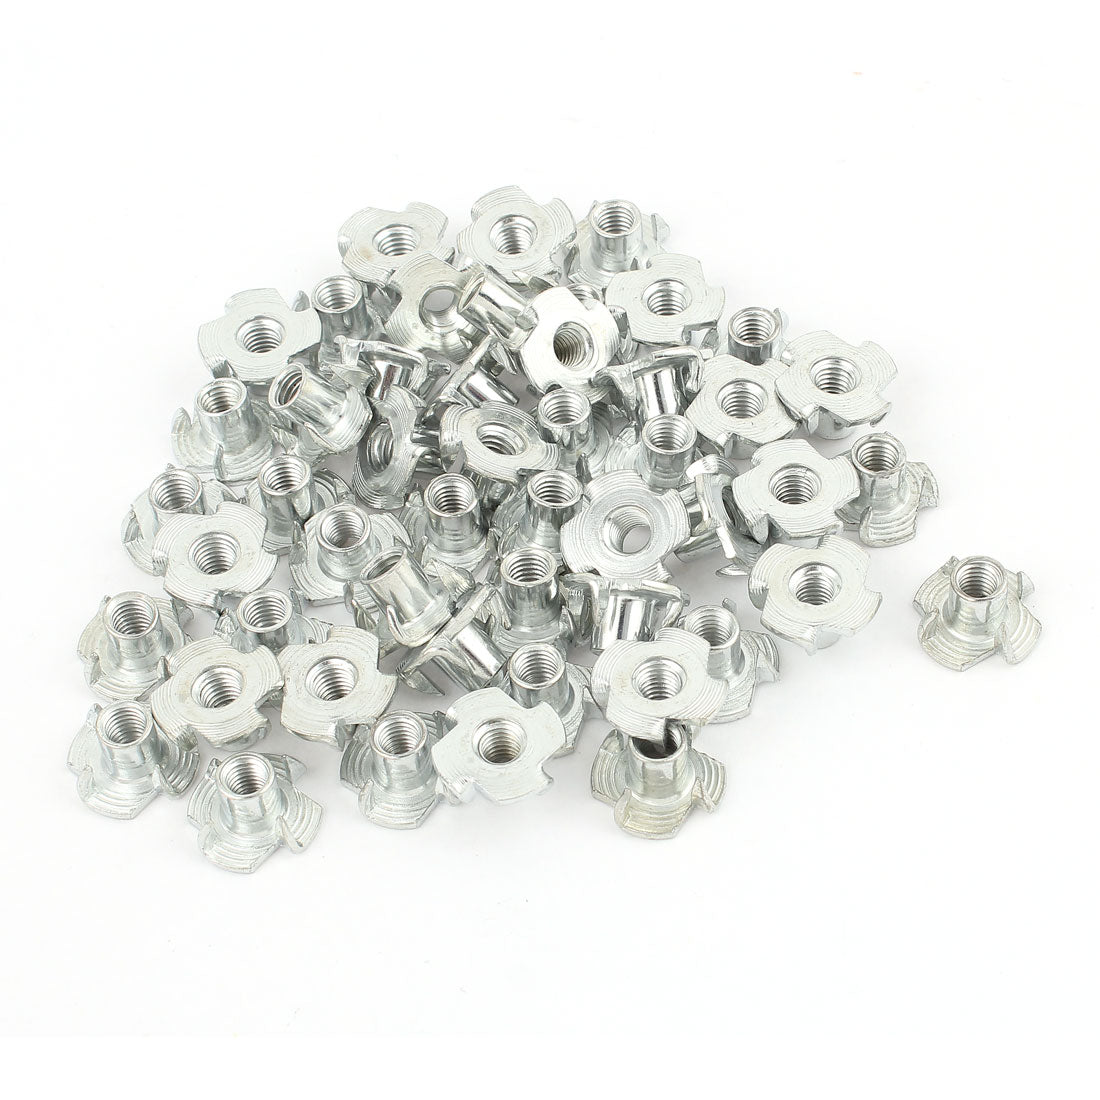 uxcell Uxcell 50Pcs 4 Prongs Carbon Steel Zinc Plated T-Nut Tee Nut M5 x 8mm